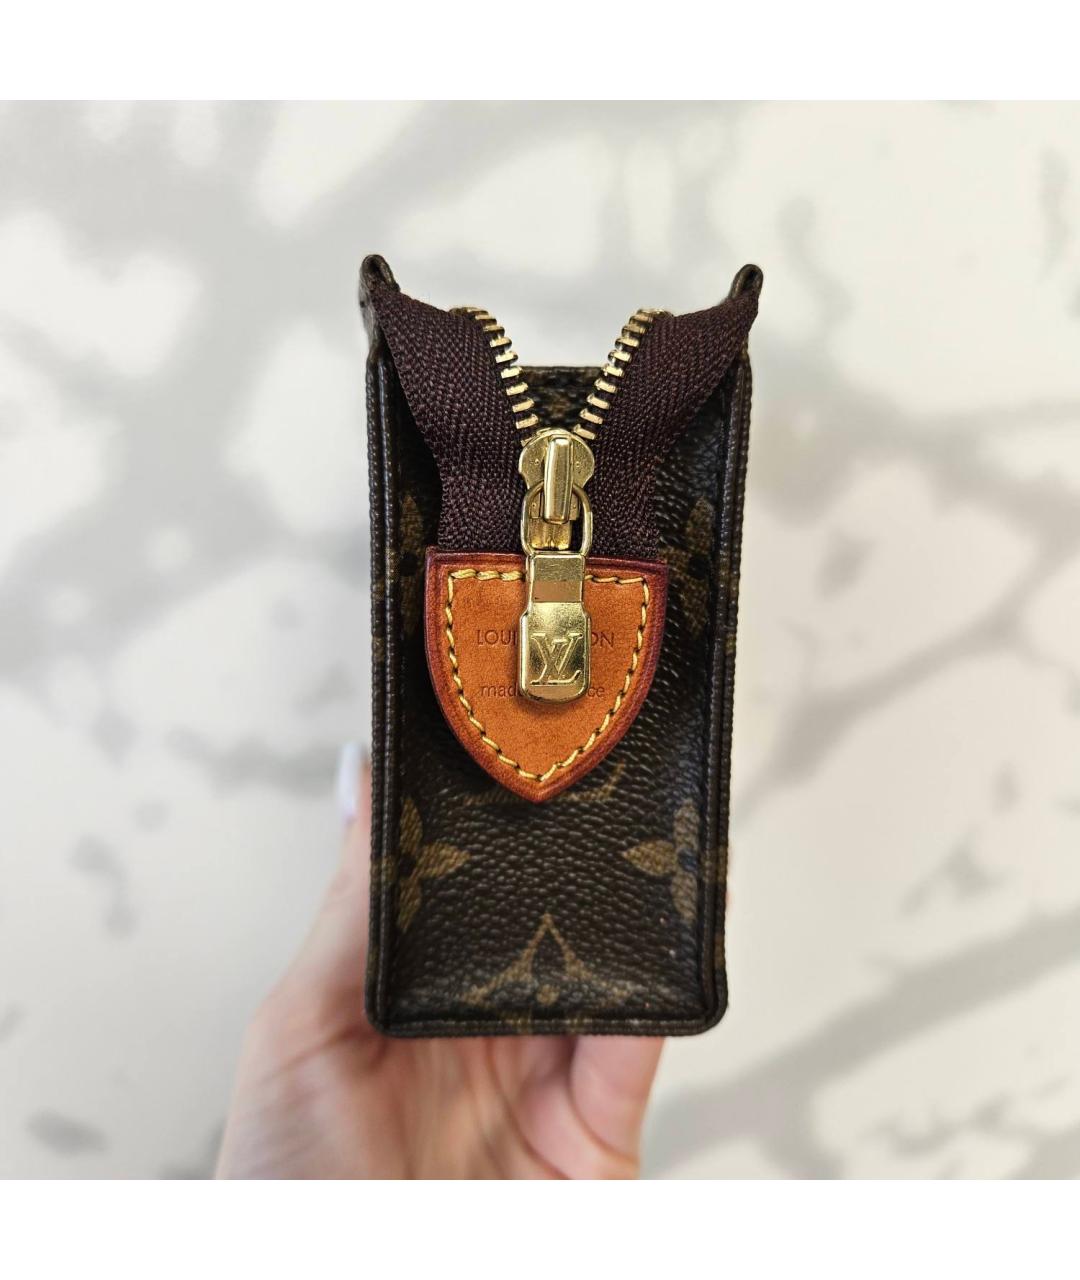 LOUIS VUITTON PRE-OWNED Коричневая косметичка, фото 6